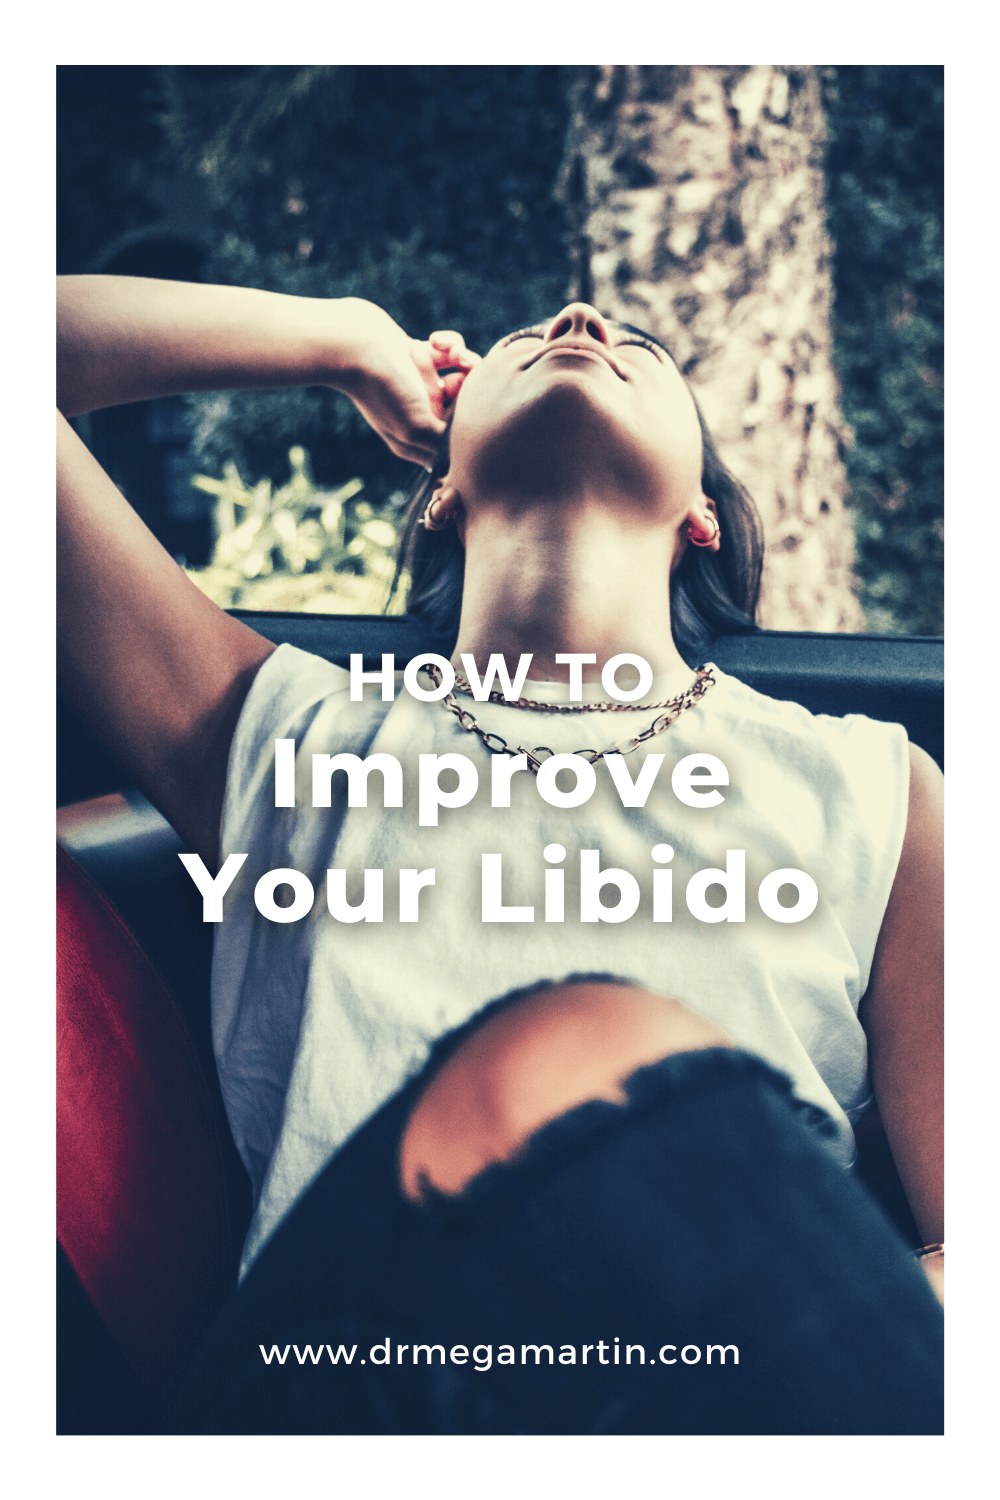 How to take the brakes off your libido